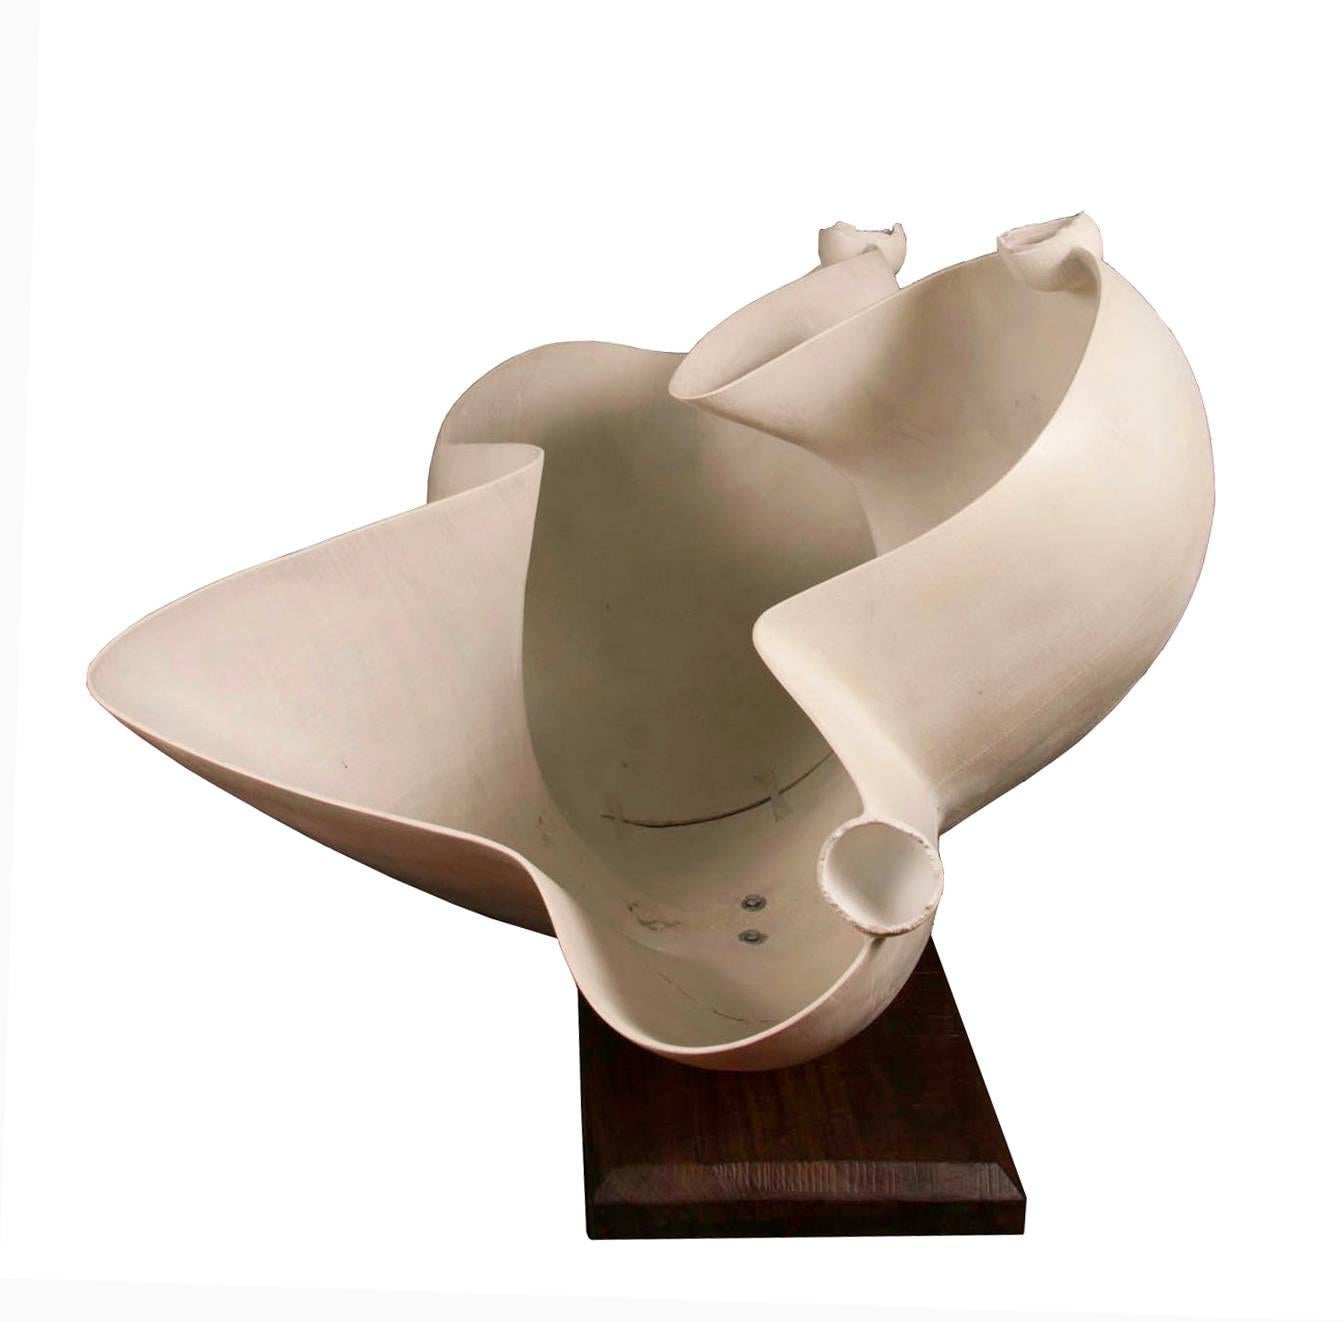 Brad Sells "Ode to Bauhaus" Wood Carved Abstract Vessel